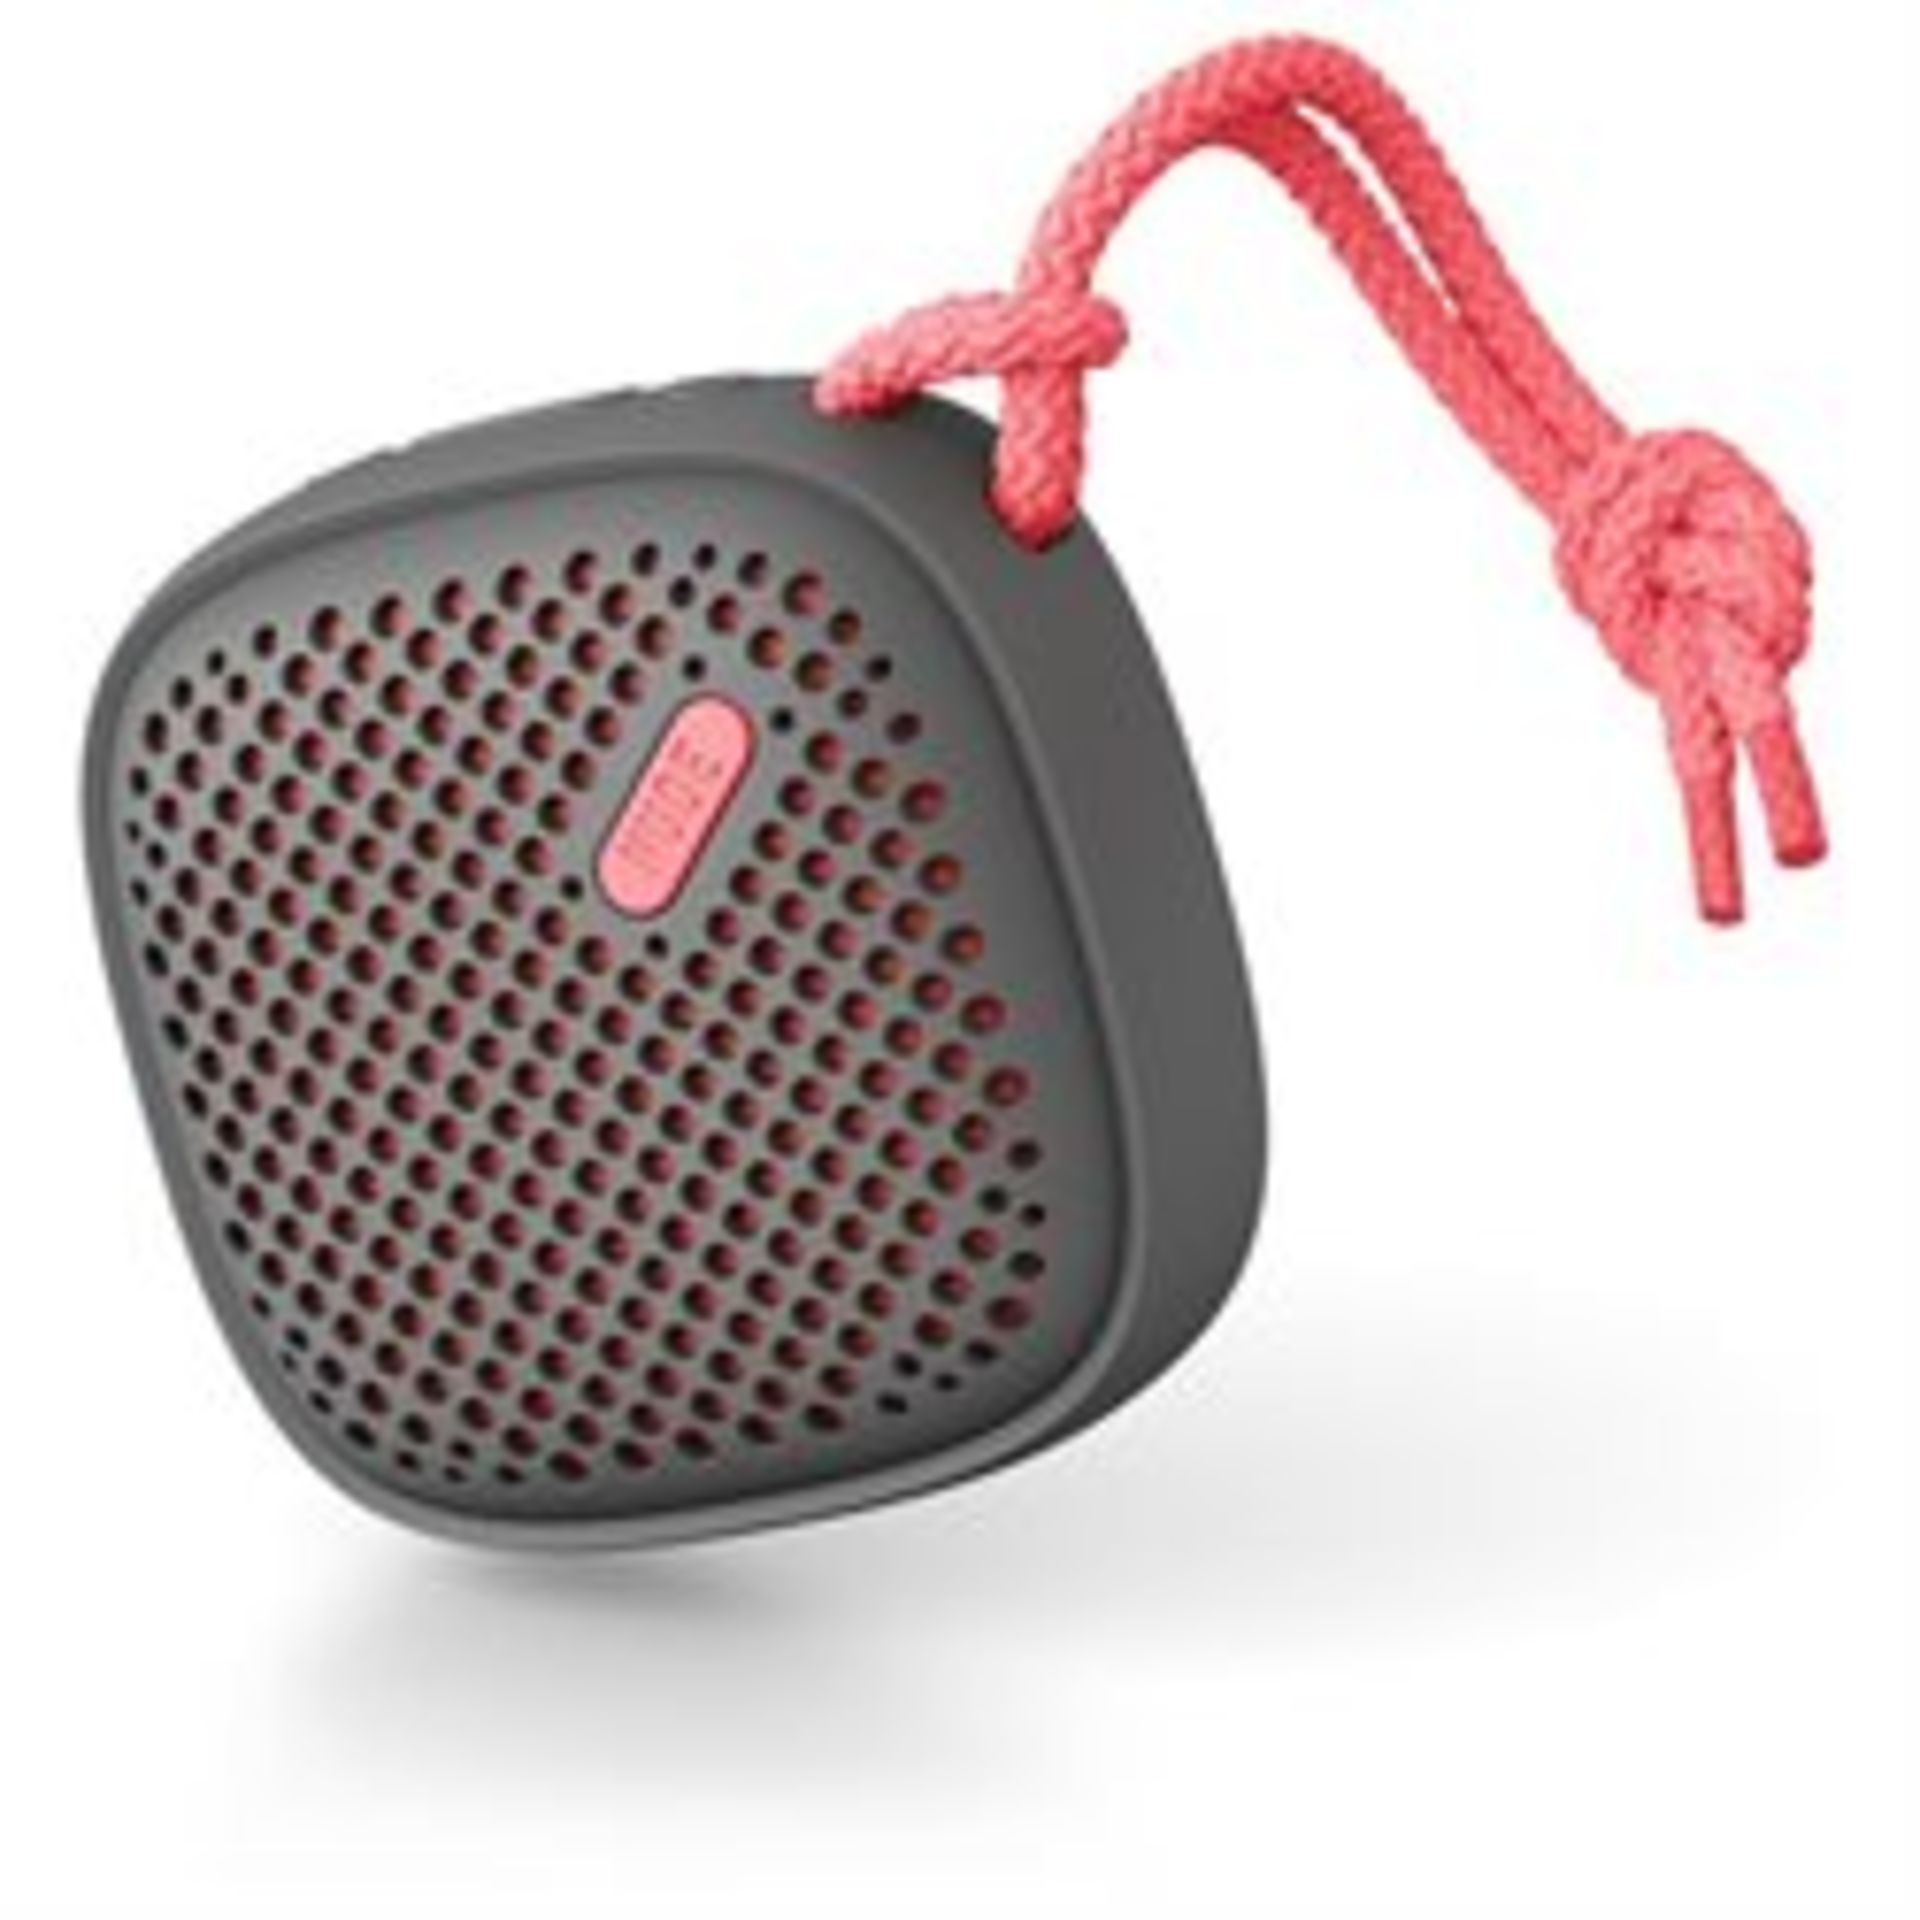 V Brand New NudeAudio Move S Universal Portable Wireless Bluetooth Speaker Charcol/Coral ISP £29.99 - Image 2 of 2